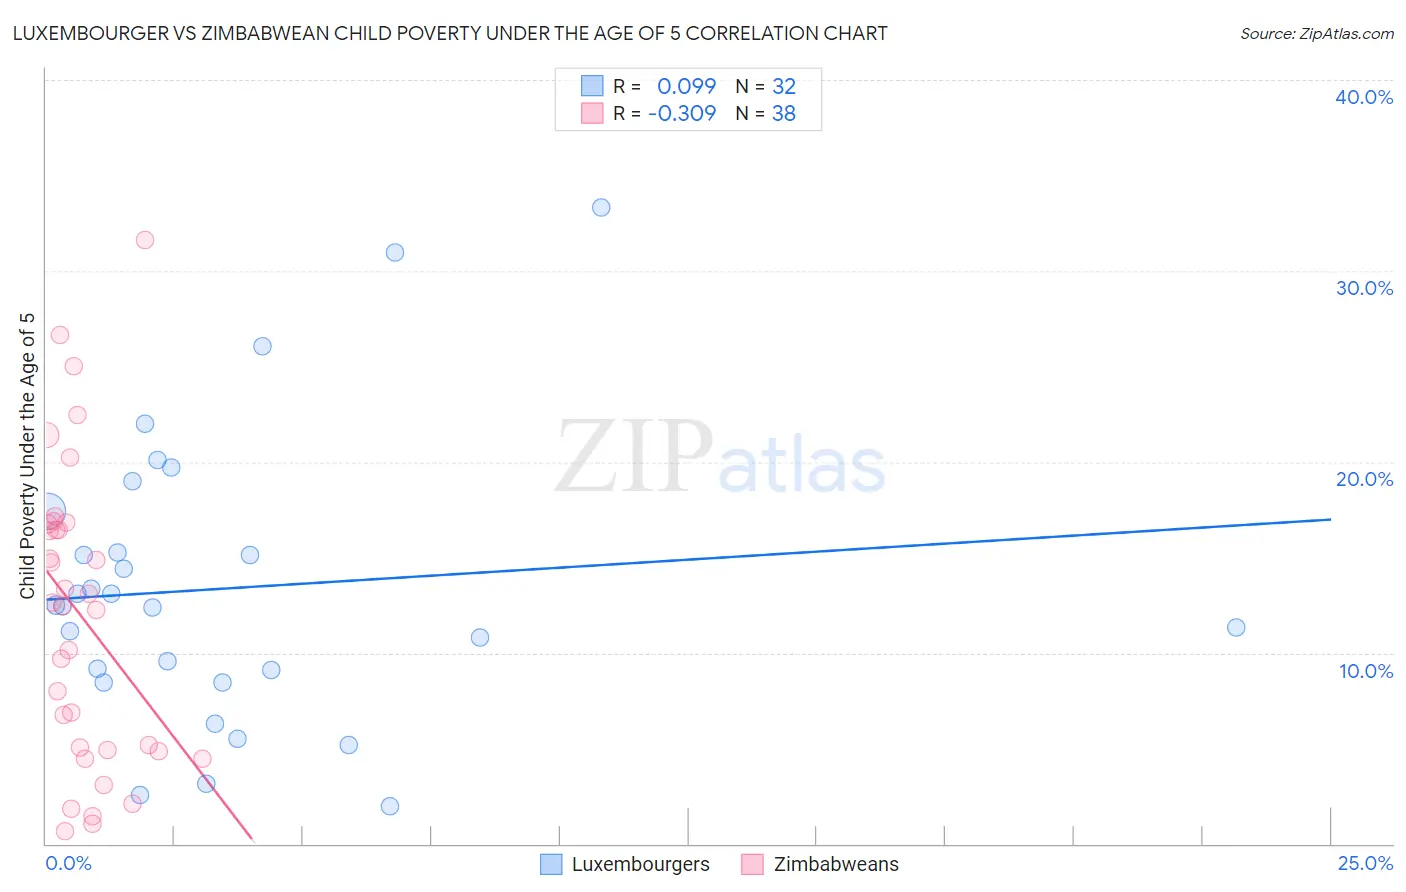 Luxembourger vs Zimbabwean Child Poverty Under the Age of 5